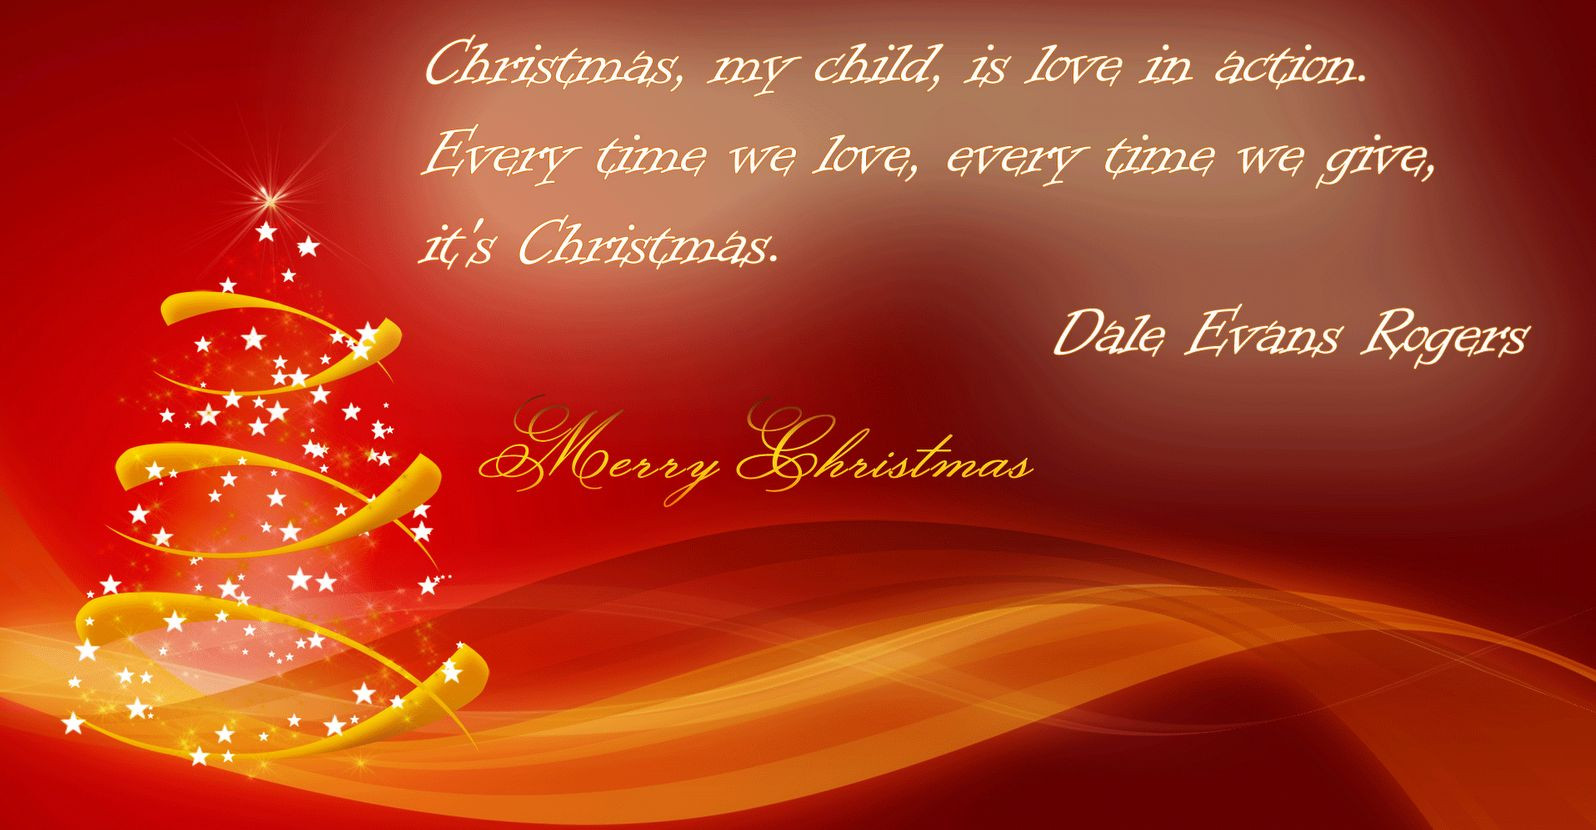 Christmas Pic And Quotes
 List Christmas Quotes 6